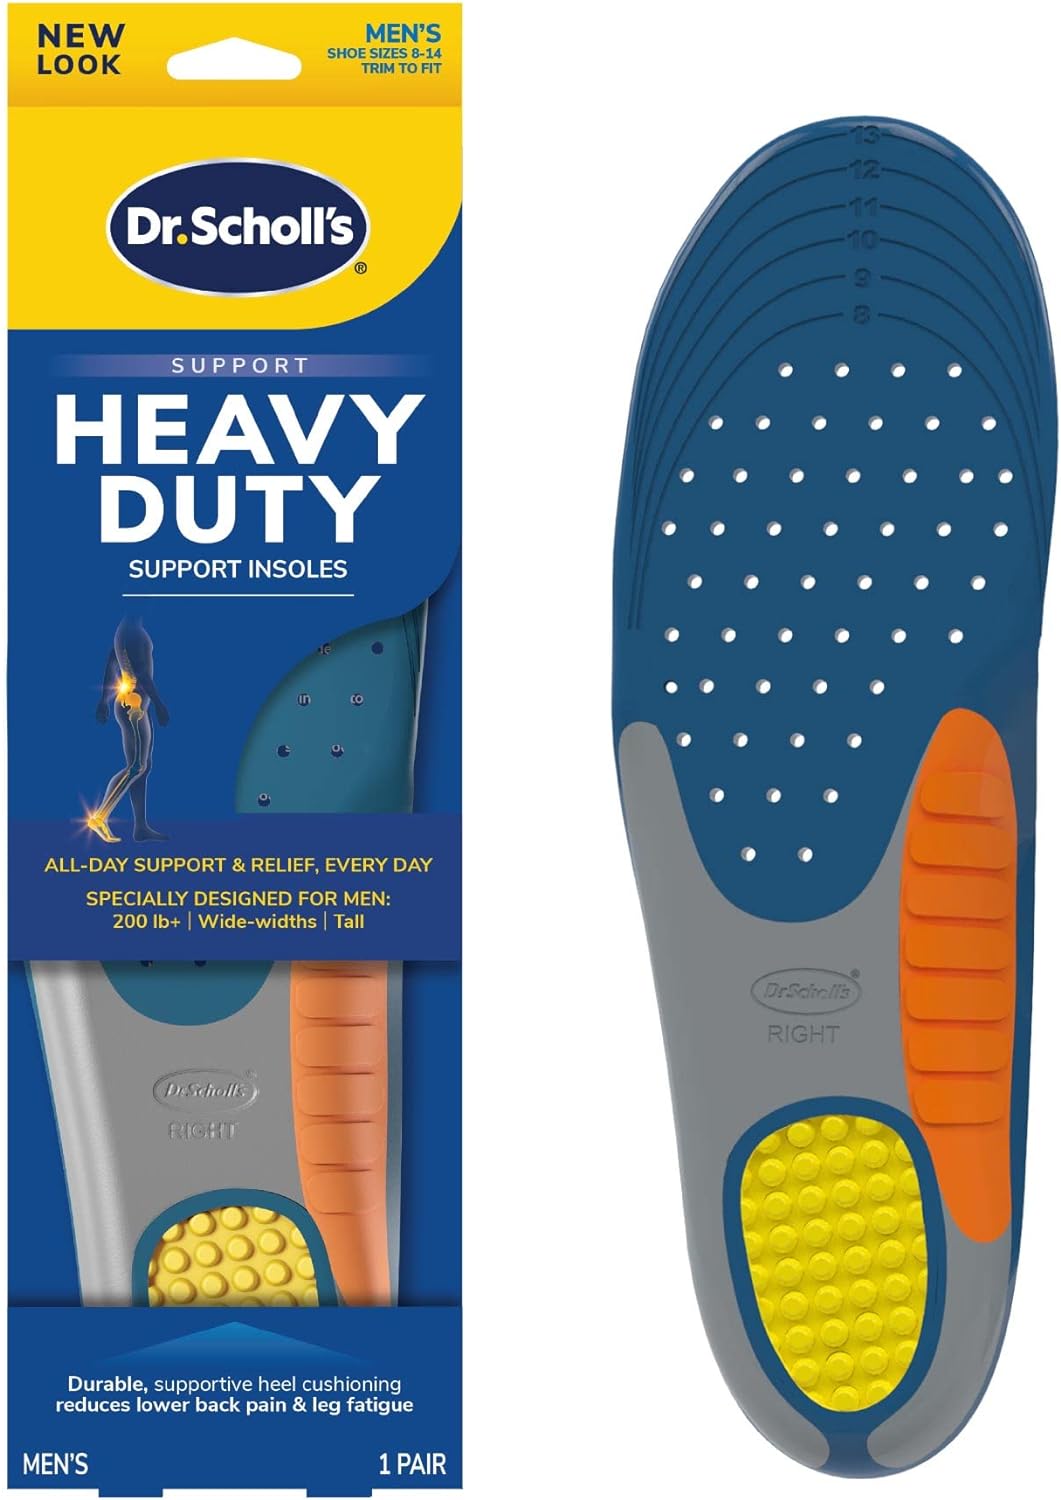 Dr. Scholls Heavy Duty Support Insole Orthotics, Big  Tall, 200lbs+, Wide Feet, Shock Absorbing, Arch Support, Distributes Pressure, Trim to Fit Inserts, Work Boots  Shoes, Men Size 8-14, 1 Pair